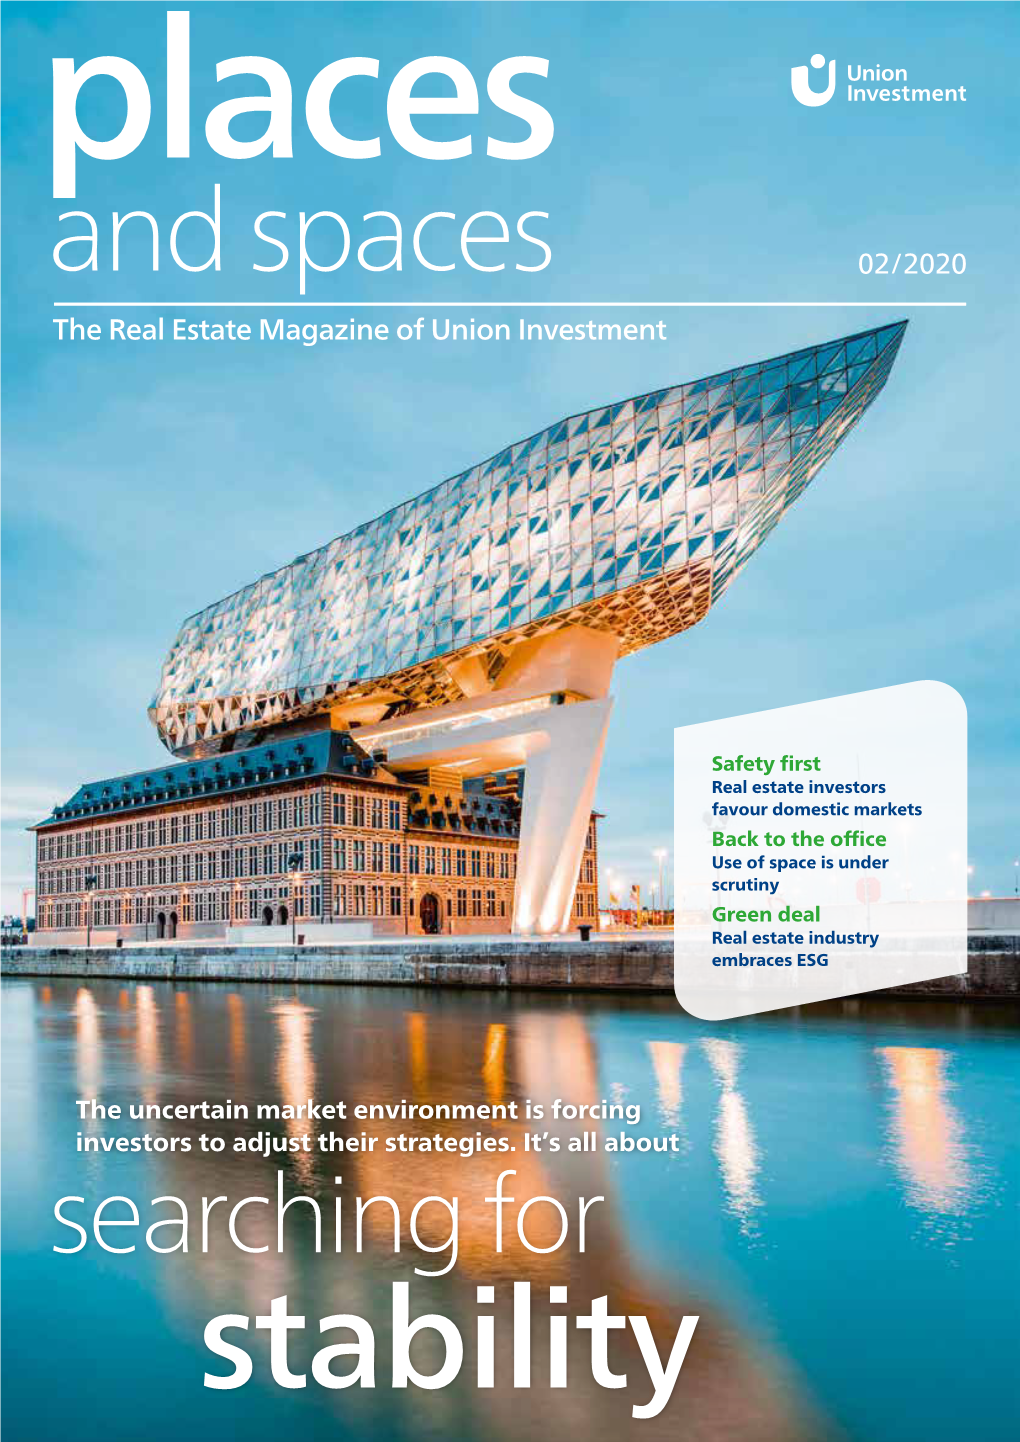 And Spaces 02/2020 the Real Estate Magazine of Union Investment